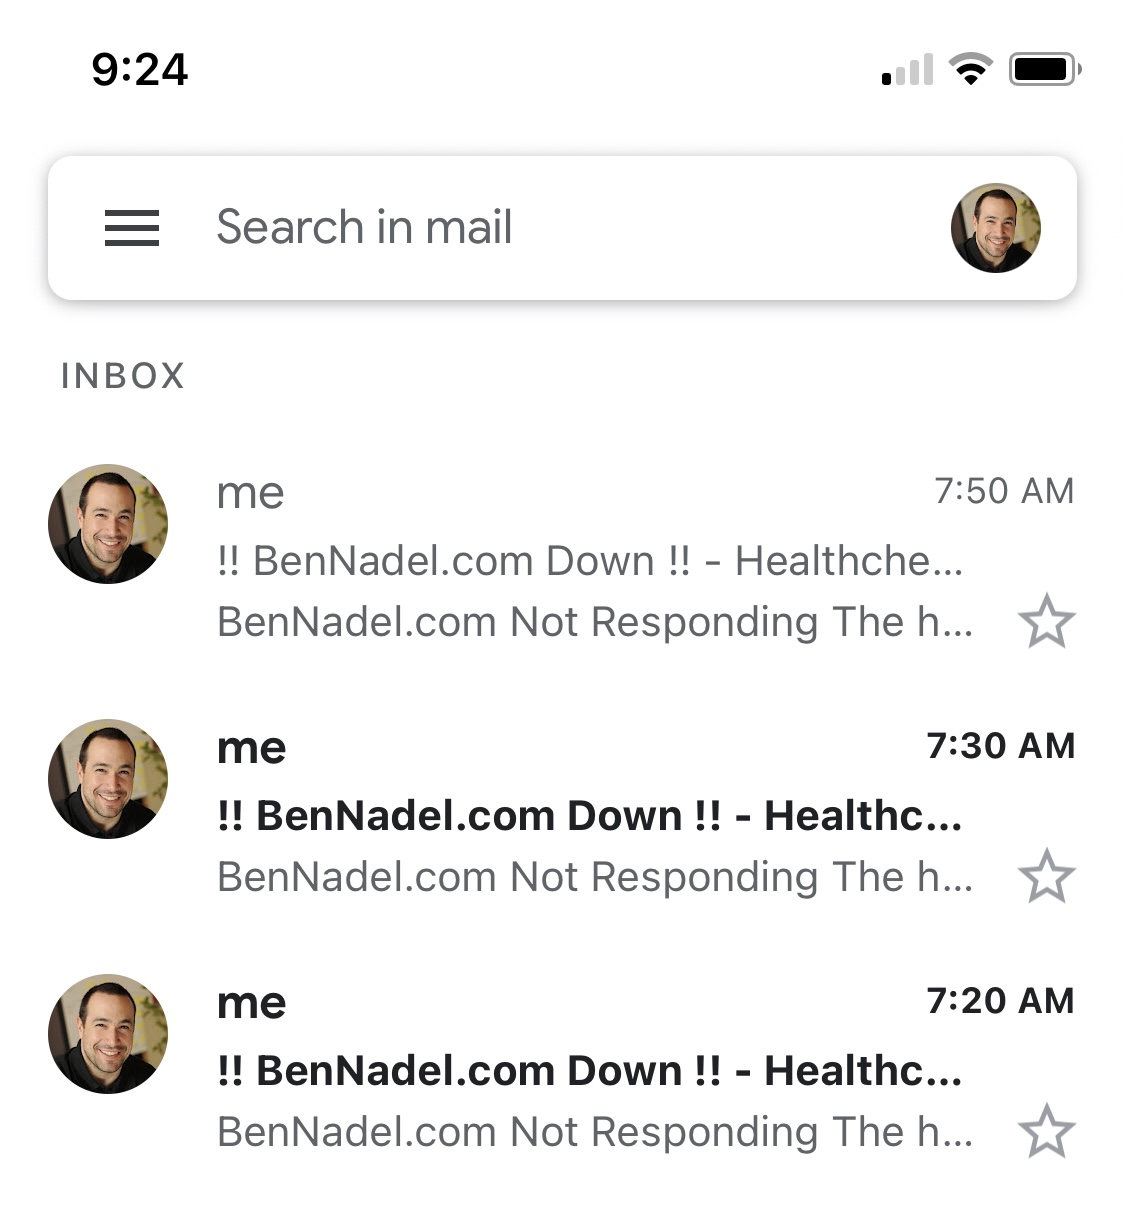 Gmail Inbox showing site-down alerts from Netlify scheduled function.